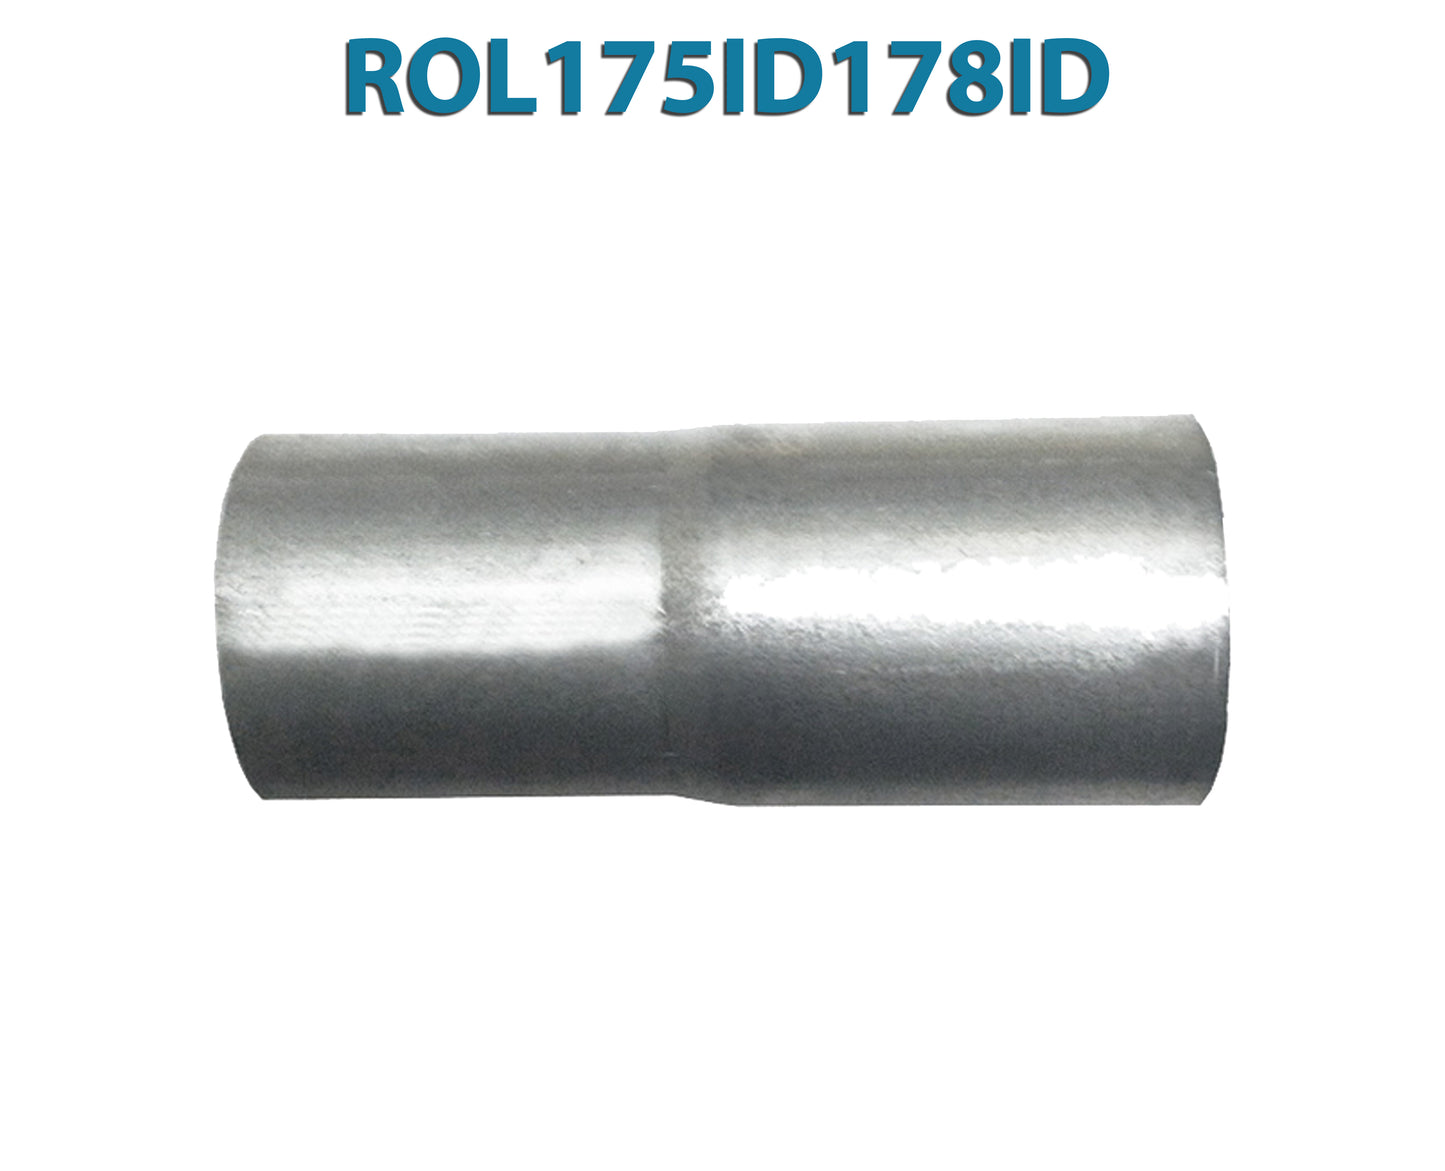 ROL175ID178ID 617575 1 3/4” ID to 1 7/8” ID Universal Exhaust Pipe to Pipe Adapter Reducer